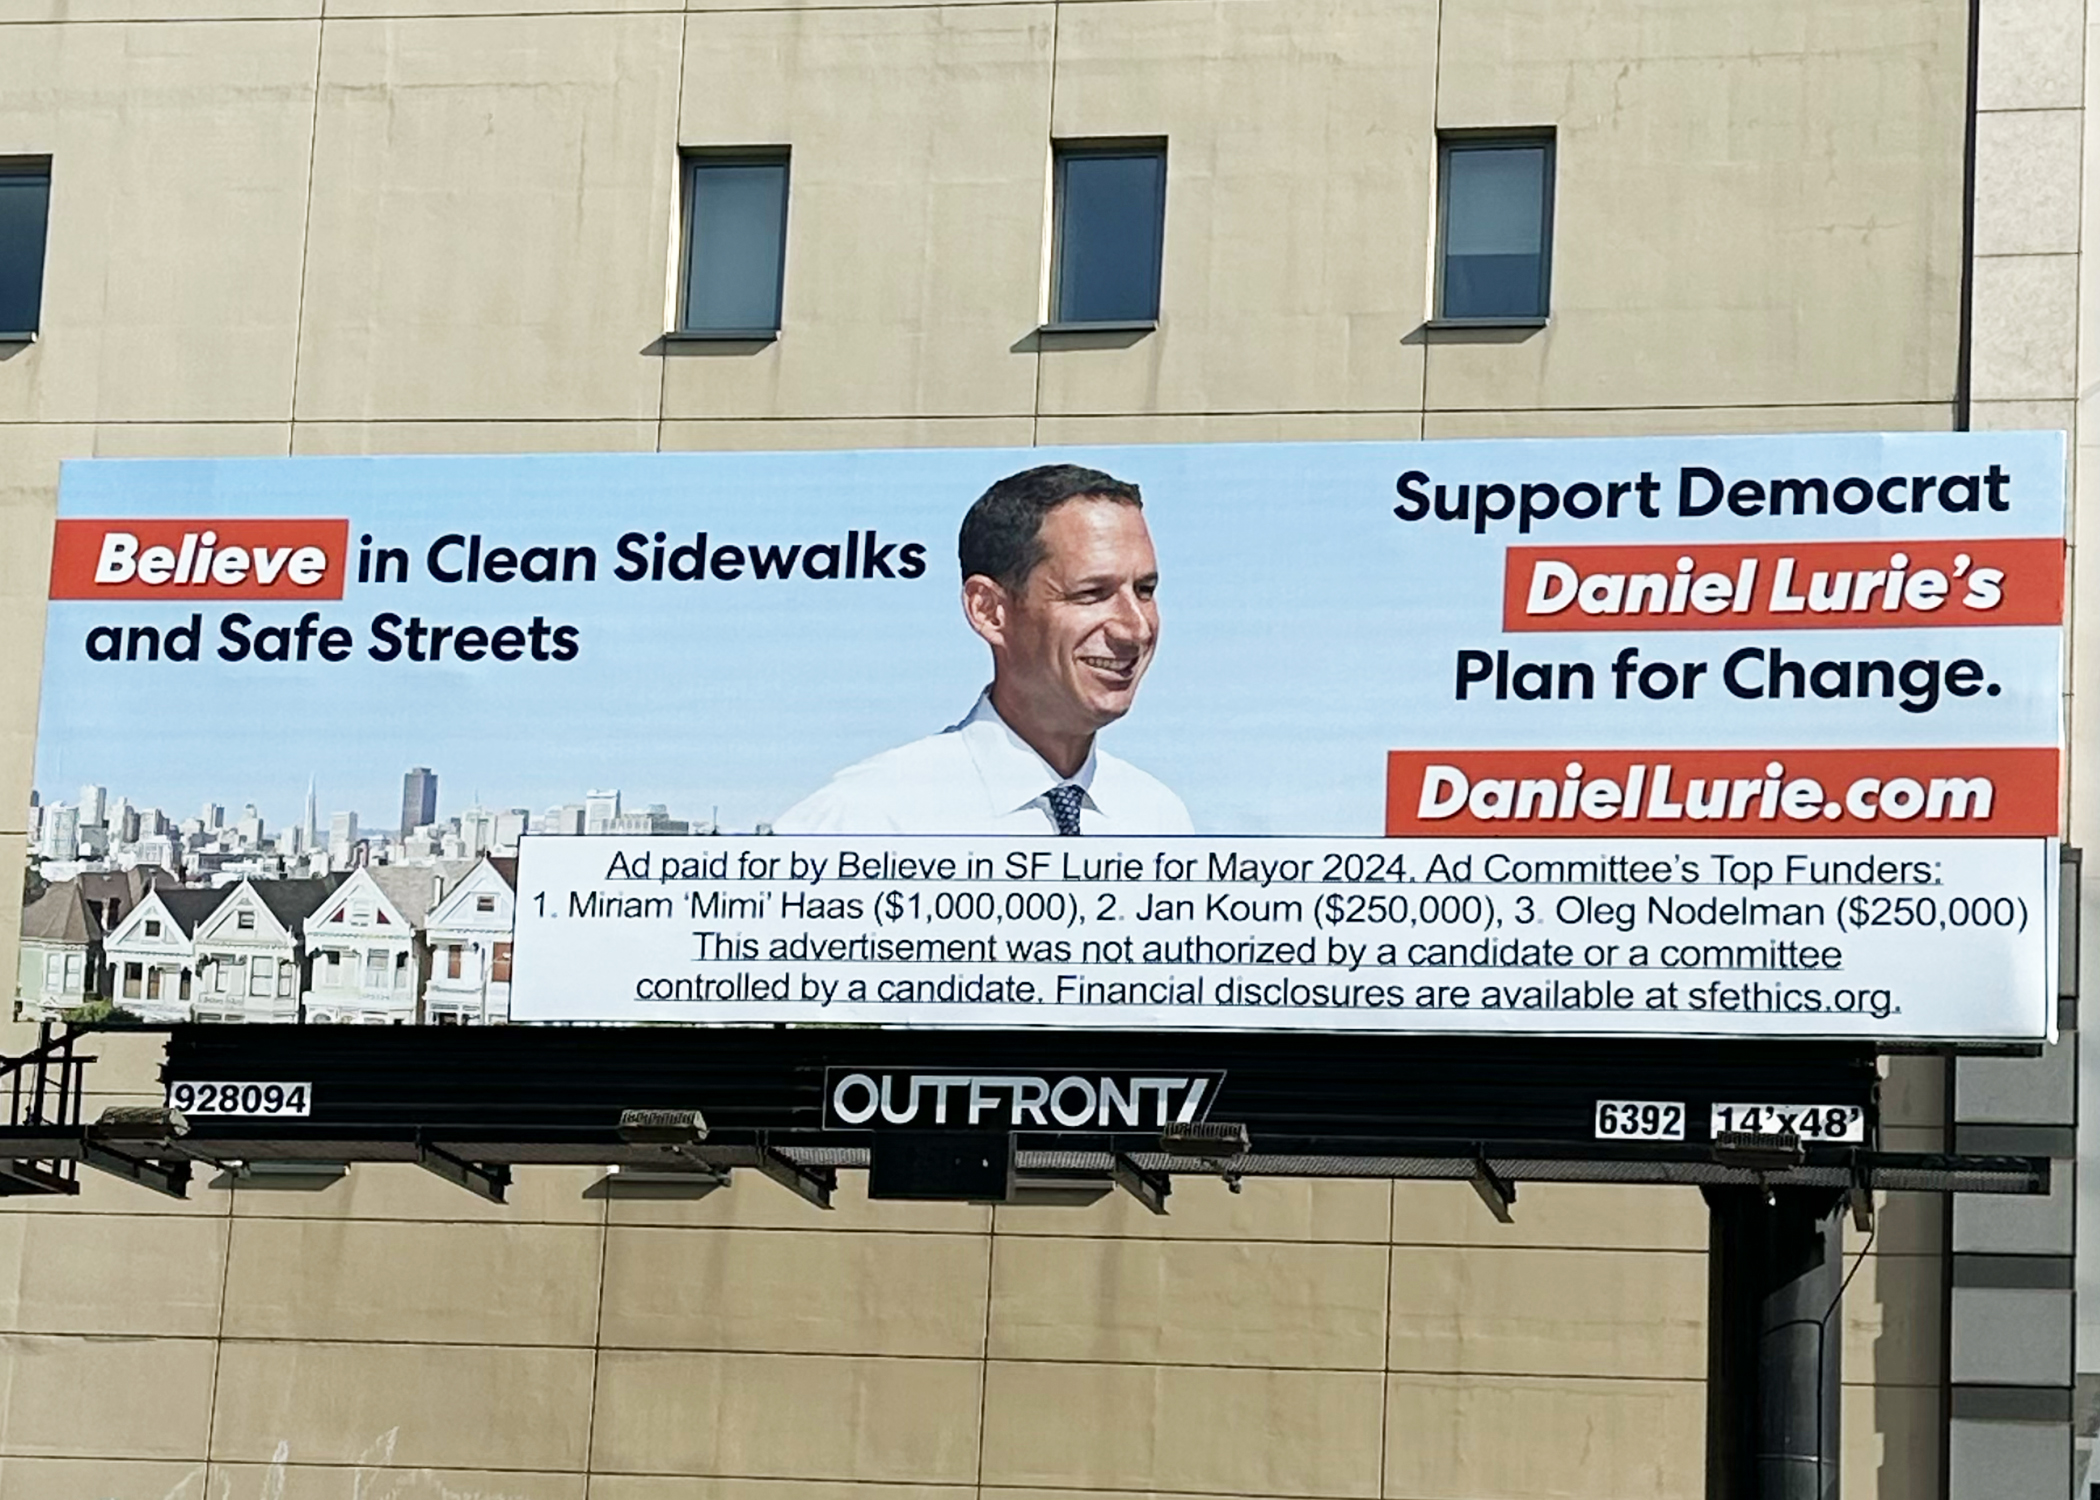 A billboard for Daniel Lurie's mayoral campaign is seen disclosing the donors who paid for the advertisement, which includes a one million dollar donation from Lurie's mother, businesswoman Mimi Haas.